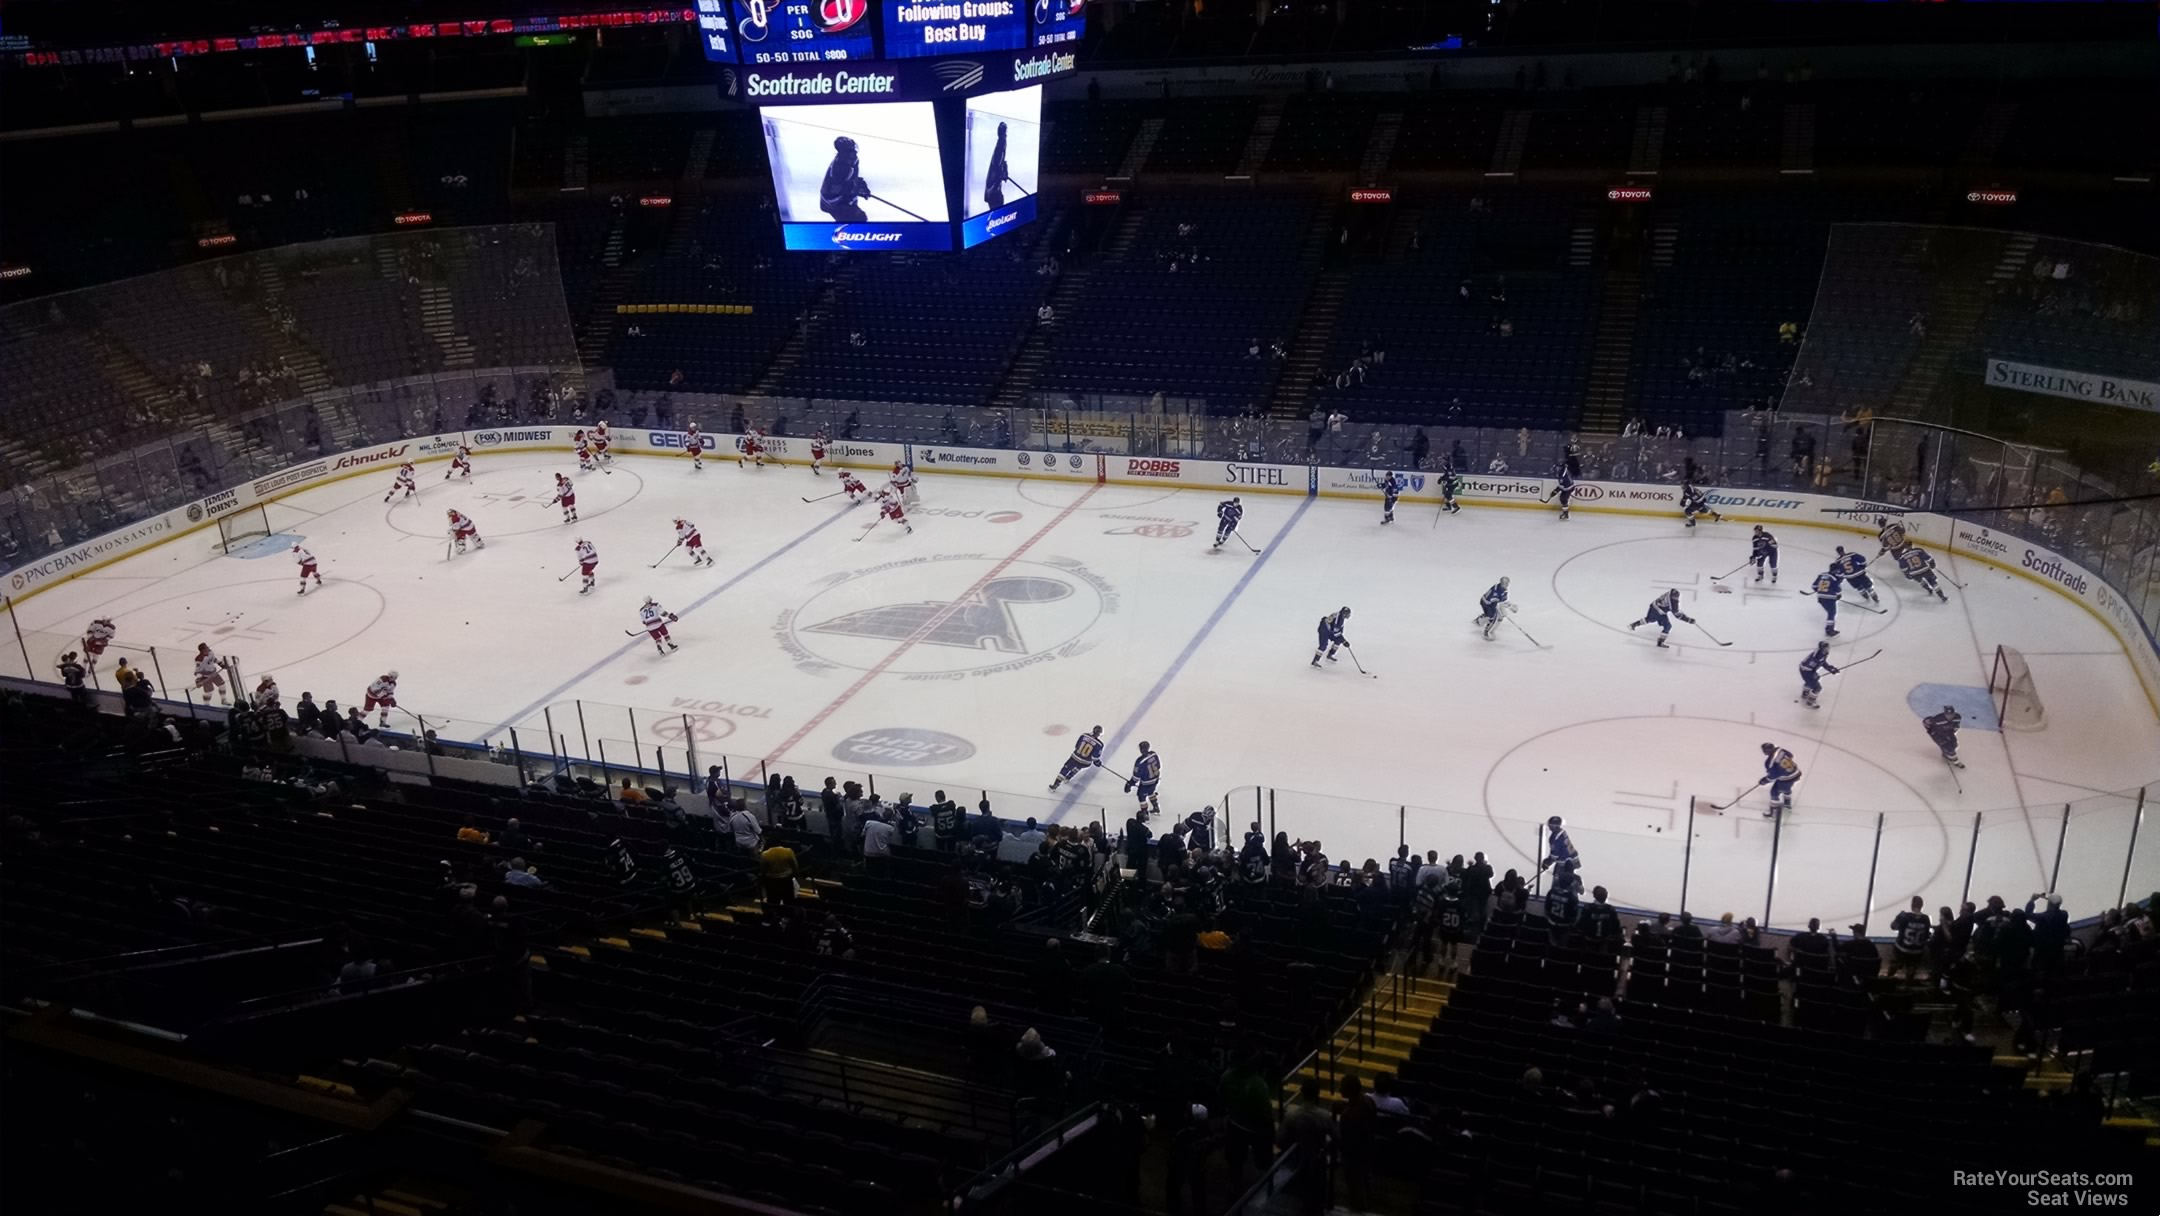 section 301, row b seat view  for hockey - enterprise center